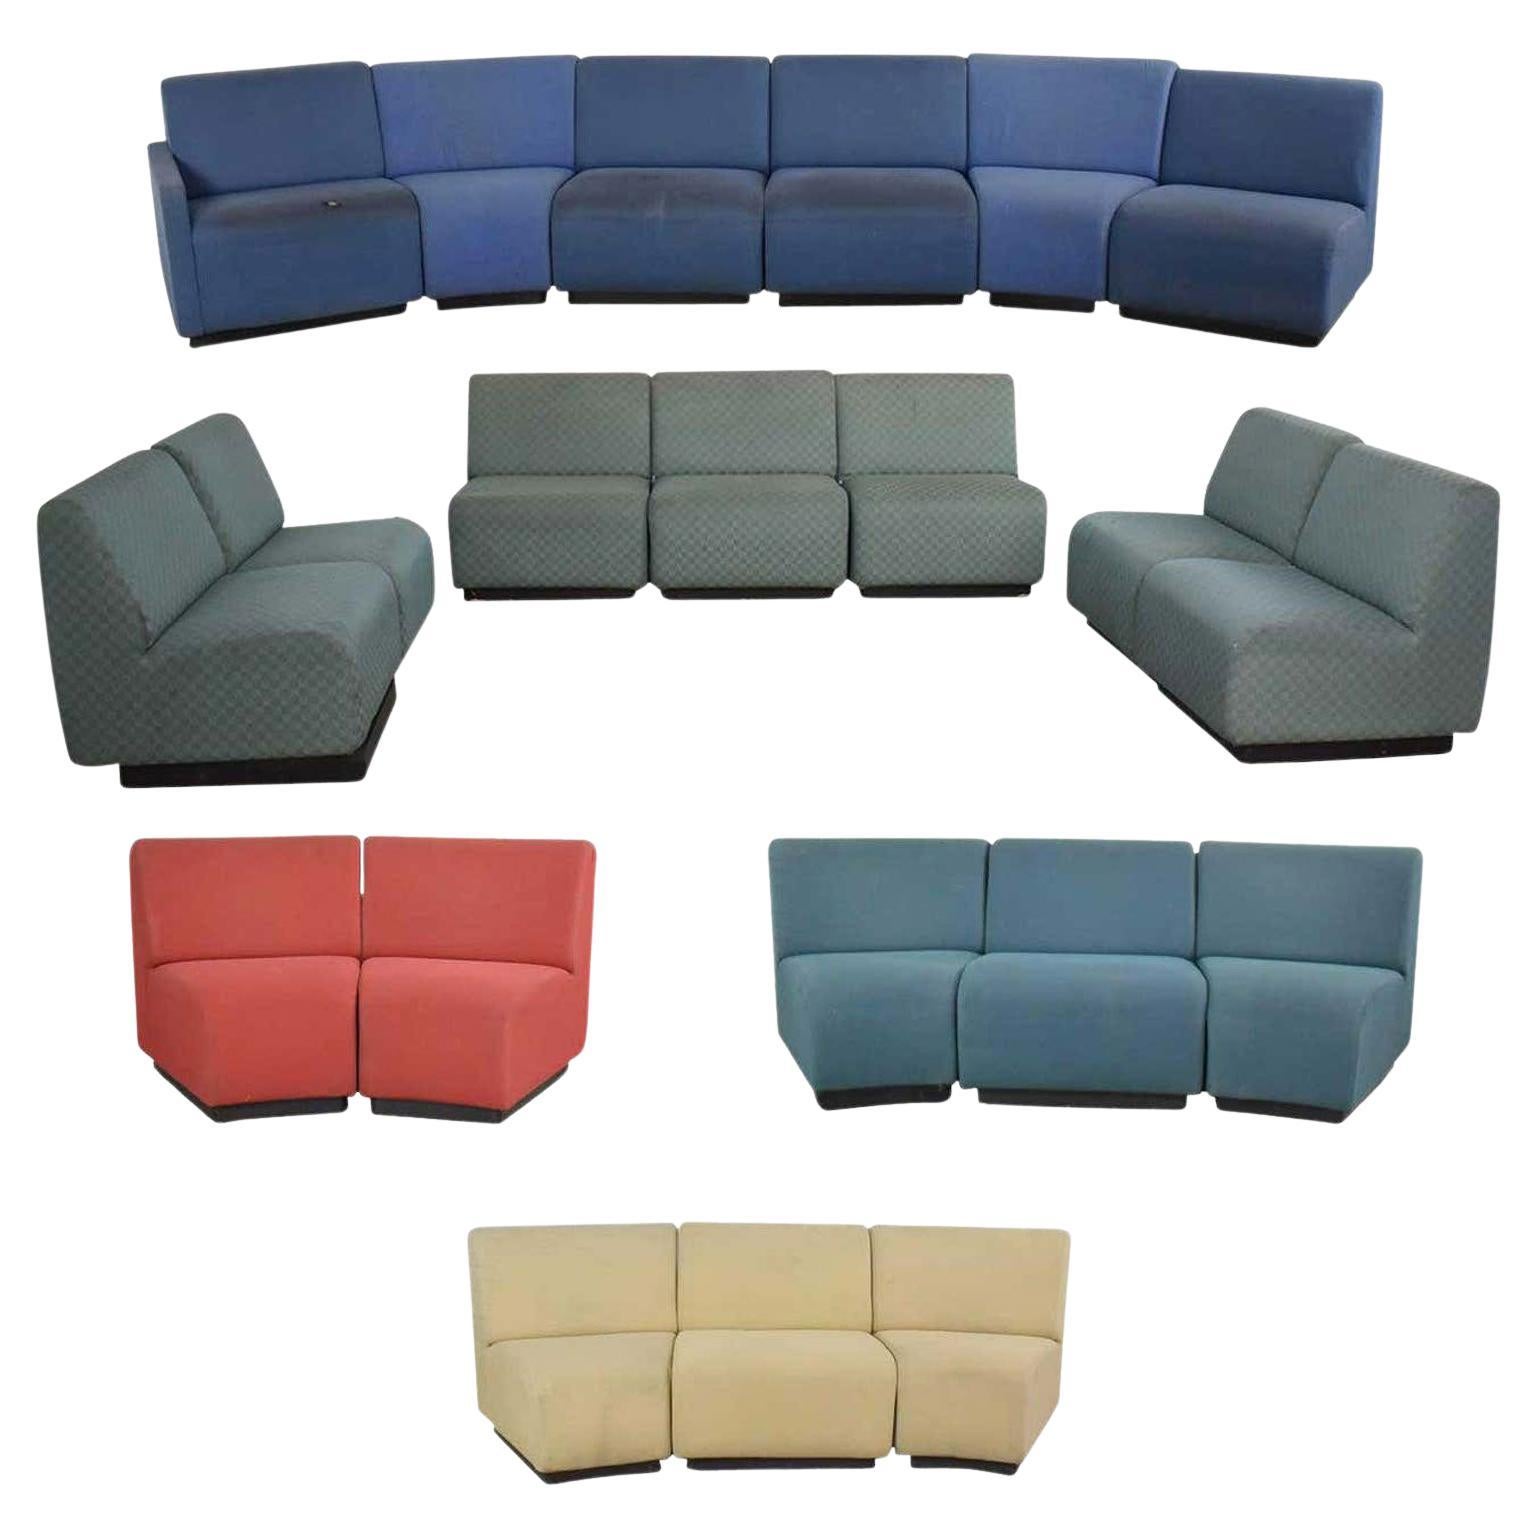 August Inc Modernity Modular Sectional Sofa Straight & Wedge Pieces Style Chadwick en vente